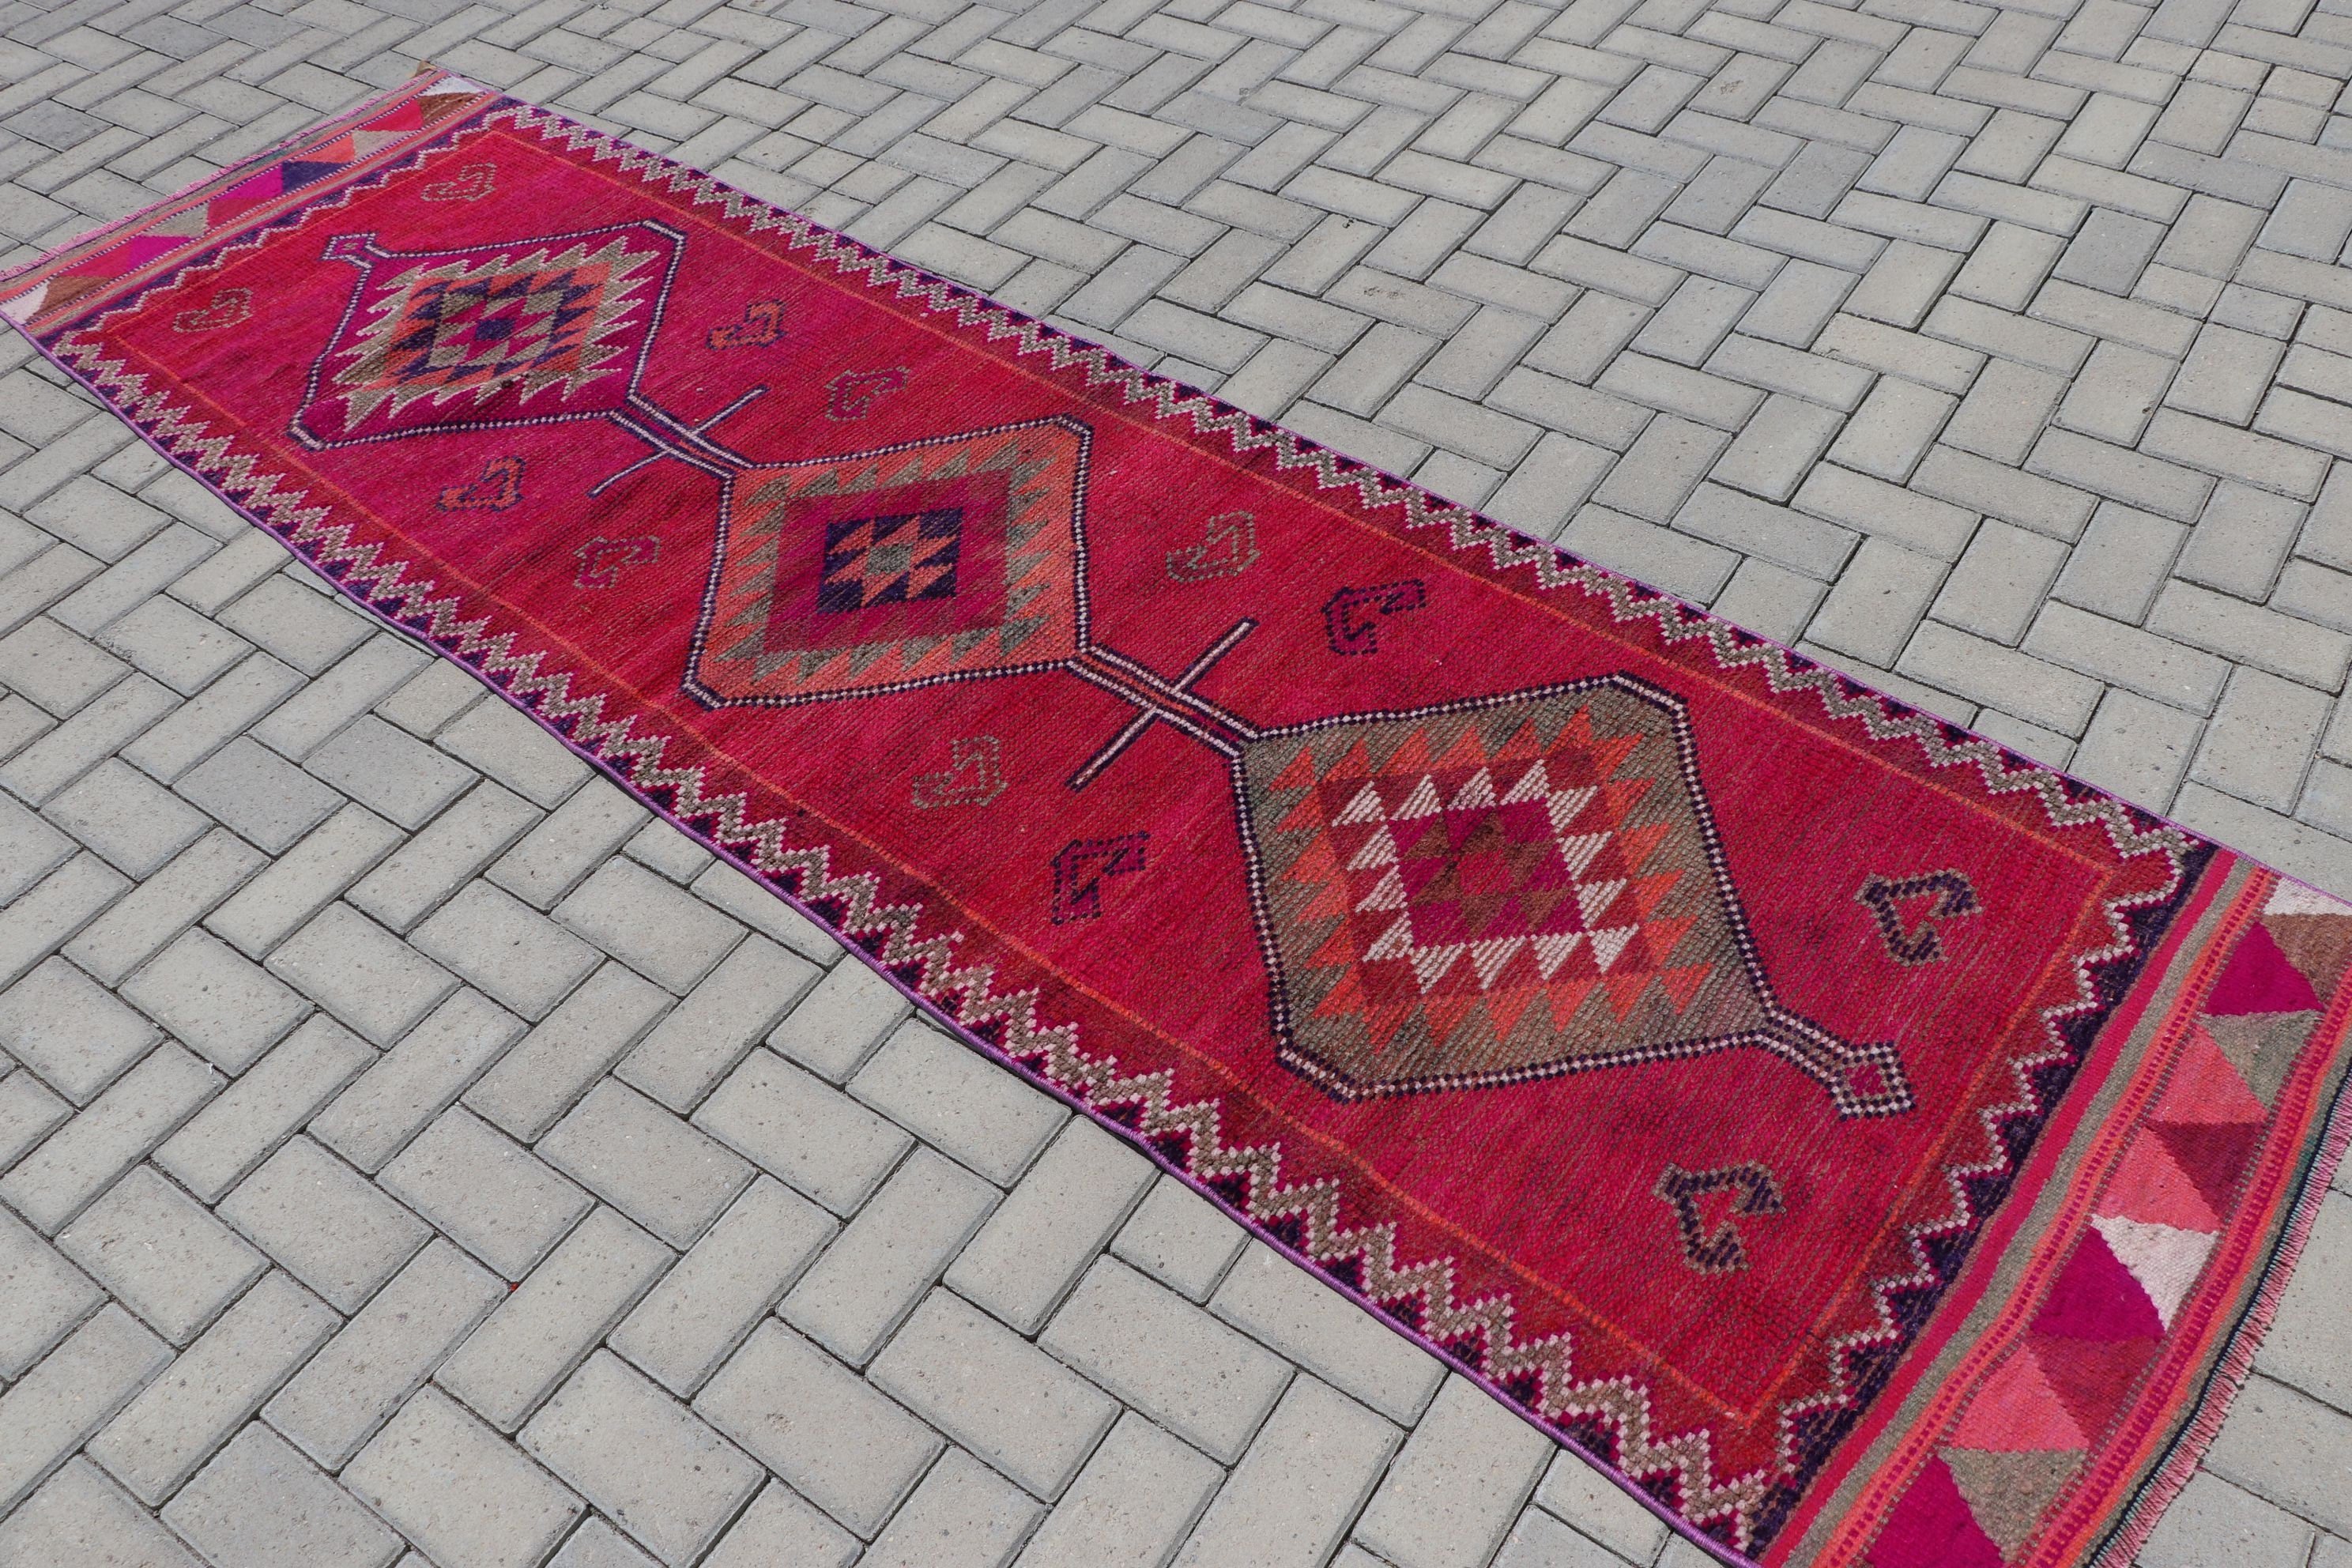 Moroccan Rugs, Pink Cool Rug, Home Decor Rug, 3x7 ft Accent Rug, Nursery Rug, Entry Rugs, Vintage Rug, Turkish Rug, Rugs for Entry, Old Rug